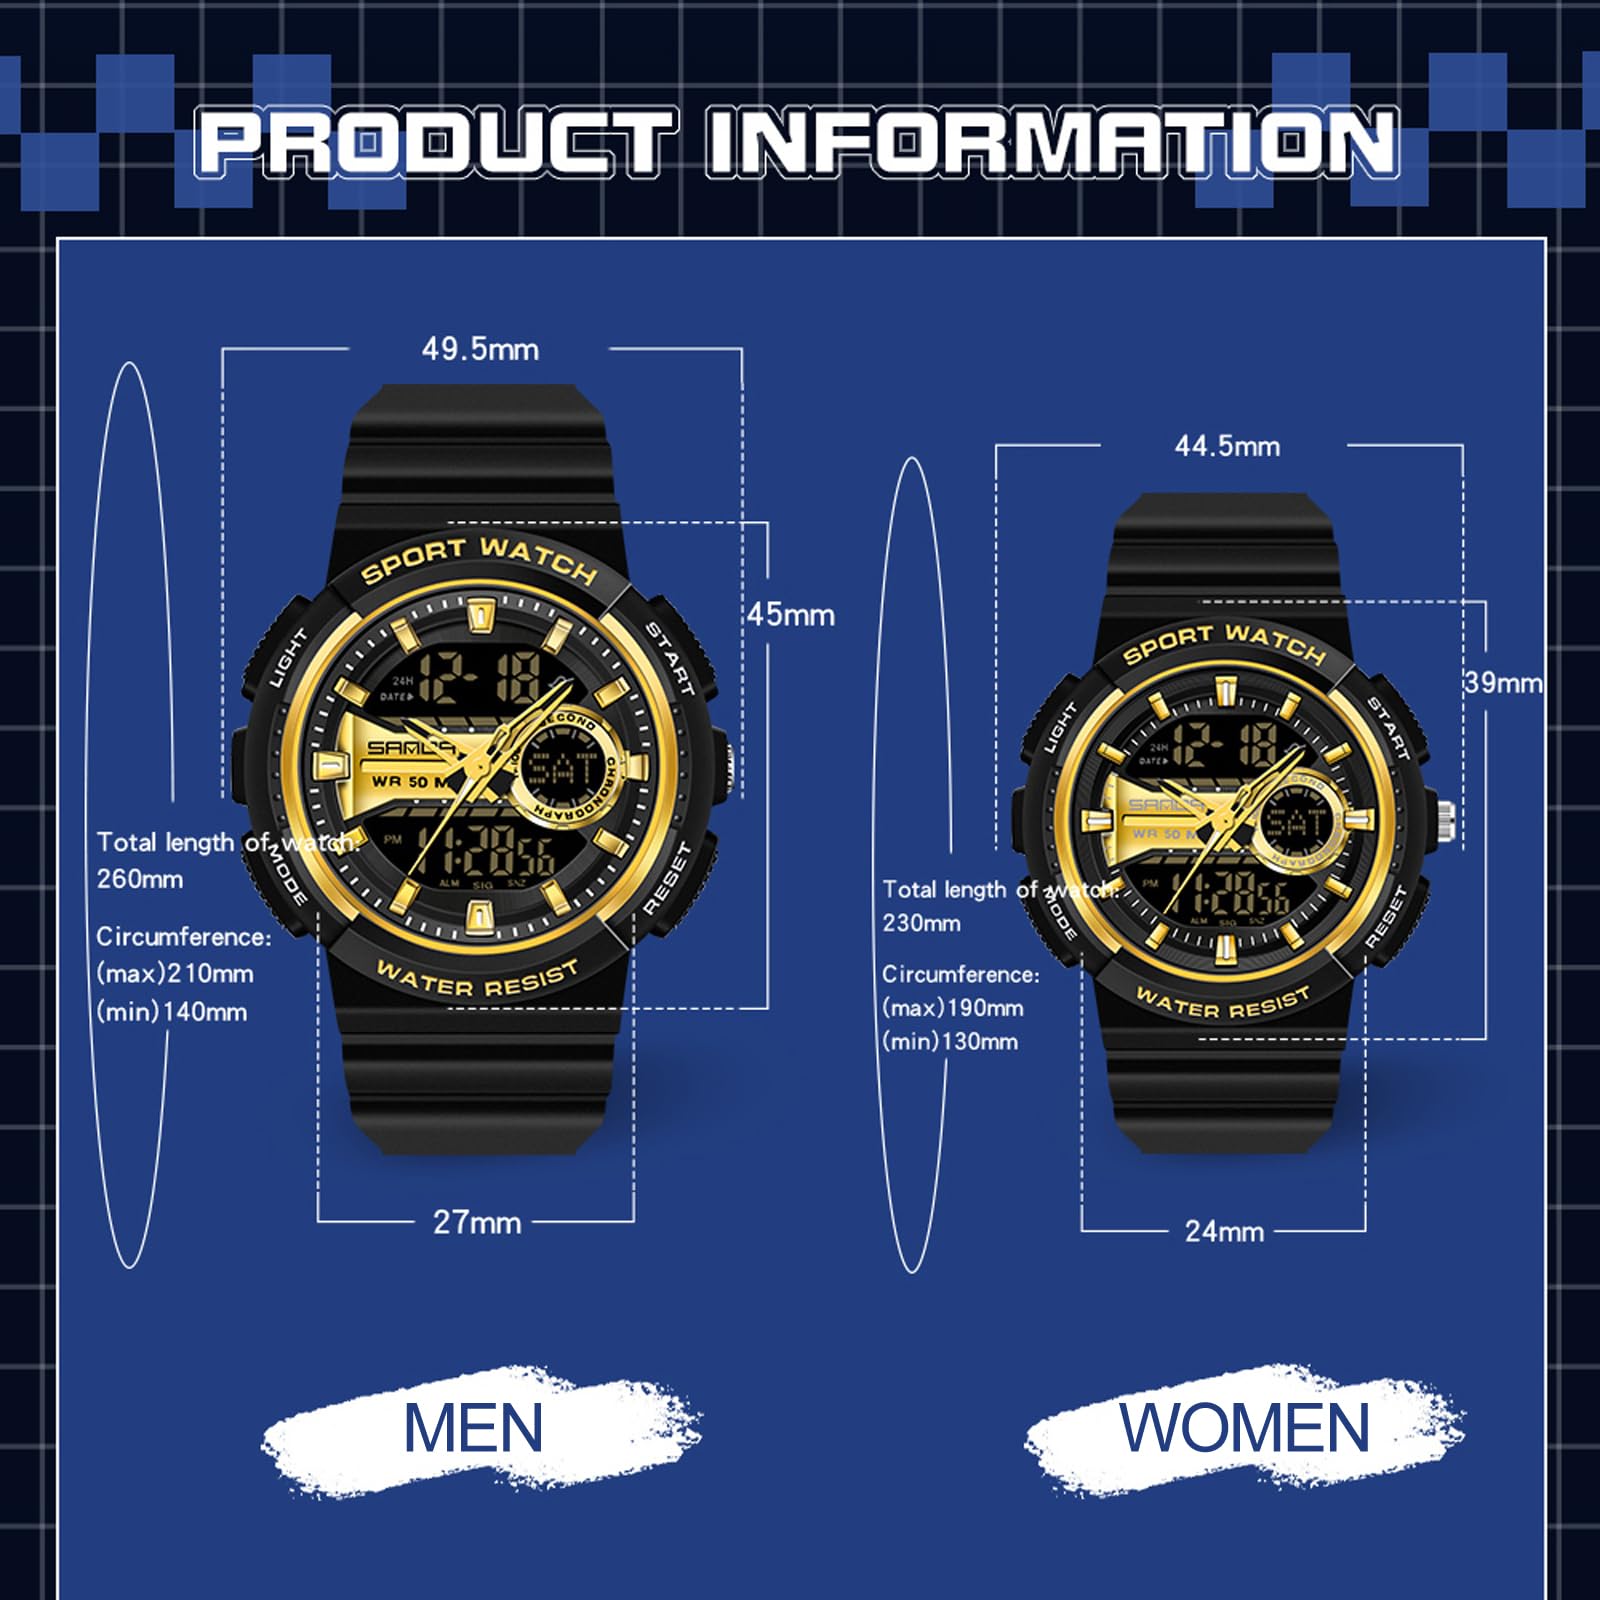 findtime Sports Watch Waterproof Digital Analogue Watches Military Tactical Outdoor Wrist Watch with LED Alarm Stopwatch Cool Couple Watch for Men Women Black White Blue Gold